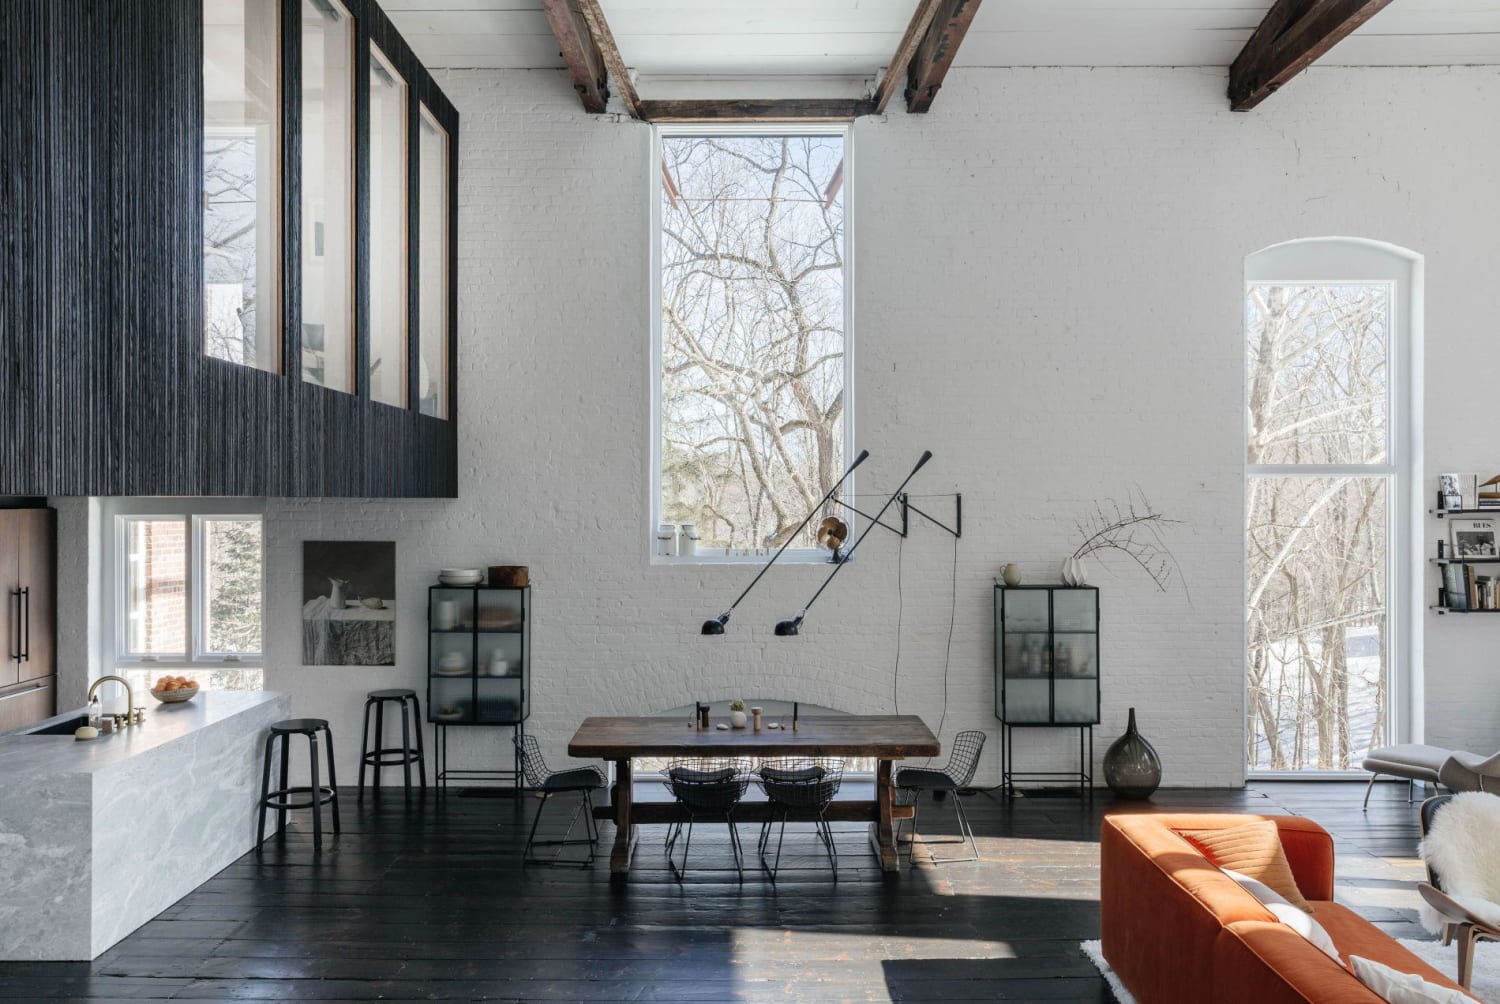 Double-height living area with a loft bedroom cantilevered above the kitchen in a former historic foundry turned home, Somers, New York by Ravi Raj Architect